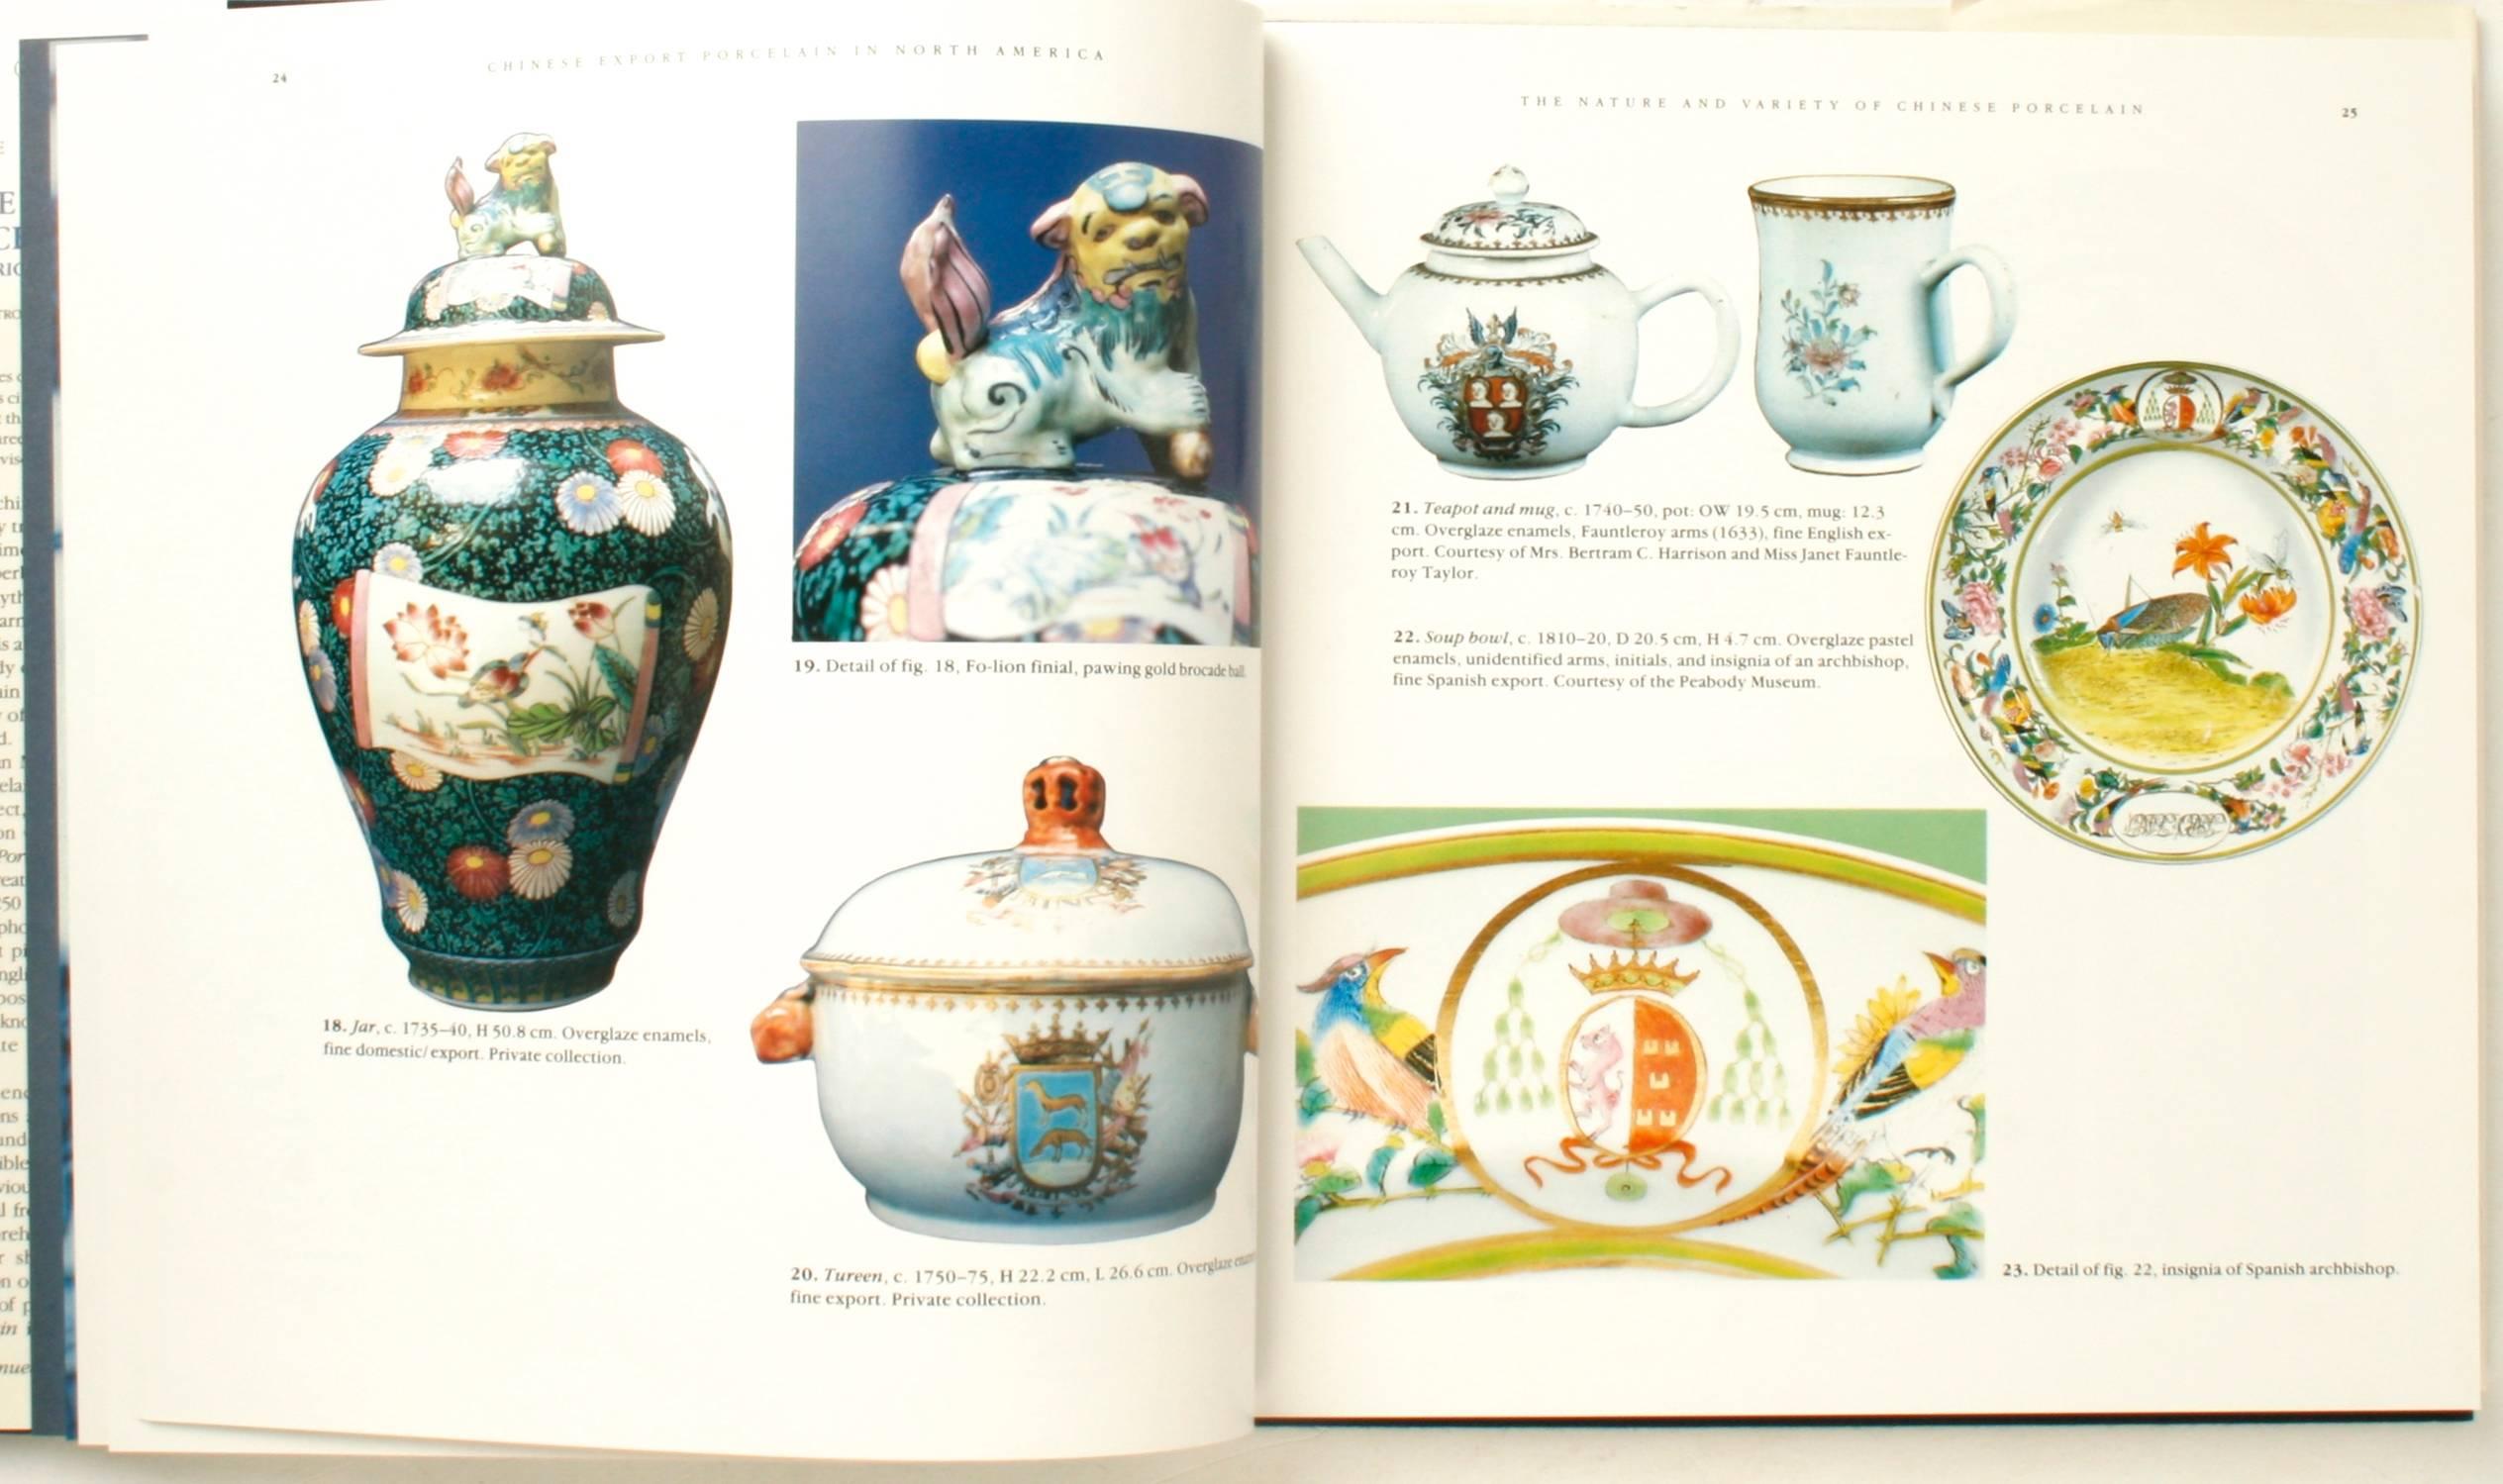 Chinese Export Porcelain in North America by Jean McClure Mudge. Stated first edition hardcover with dust jacket. Clarkson Potter, 1986, NY. 417 photos 250 in color. Extensively researched reference of Chinese exports to the US, Canada and Mexico